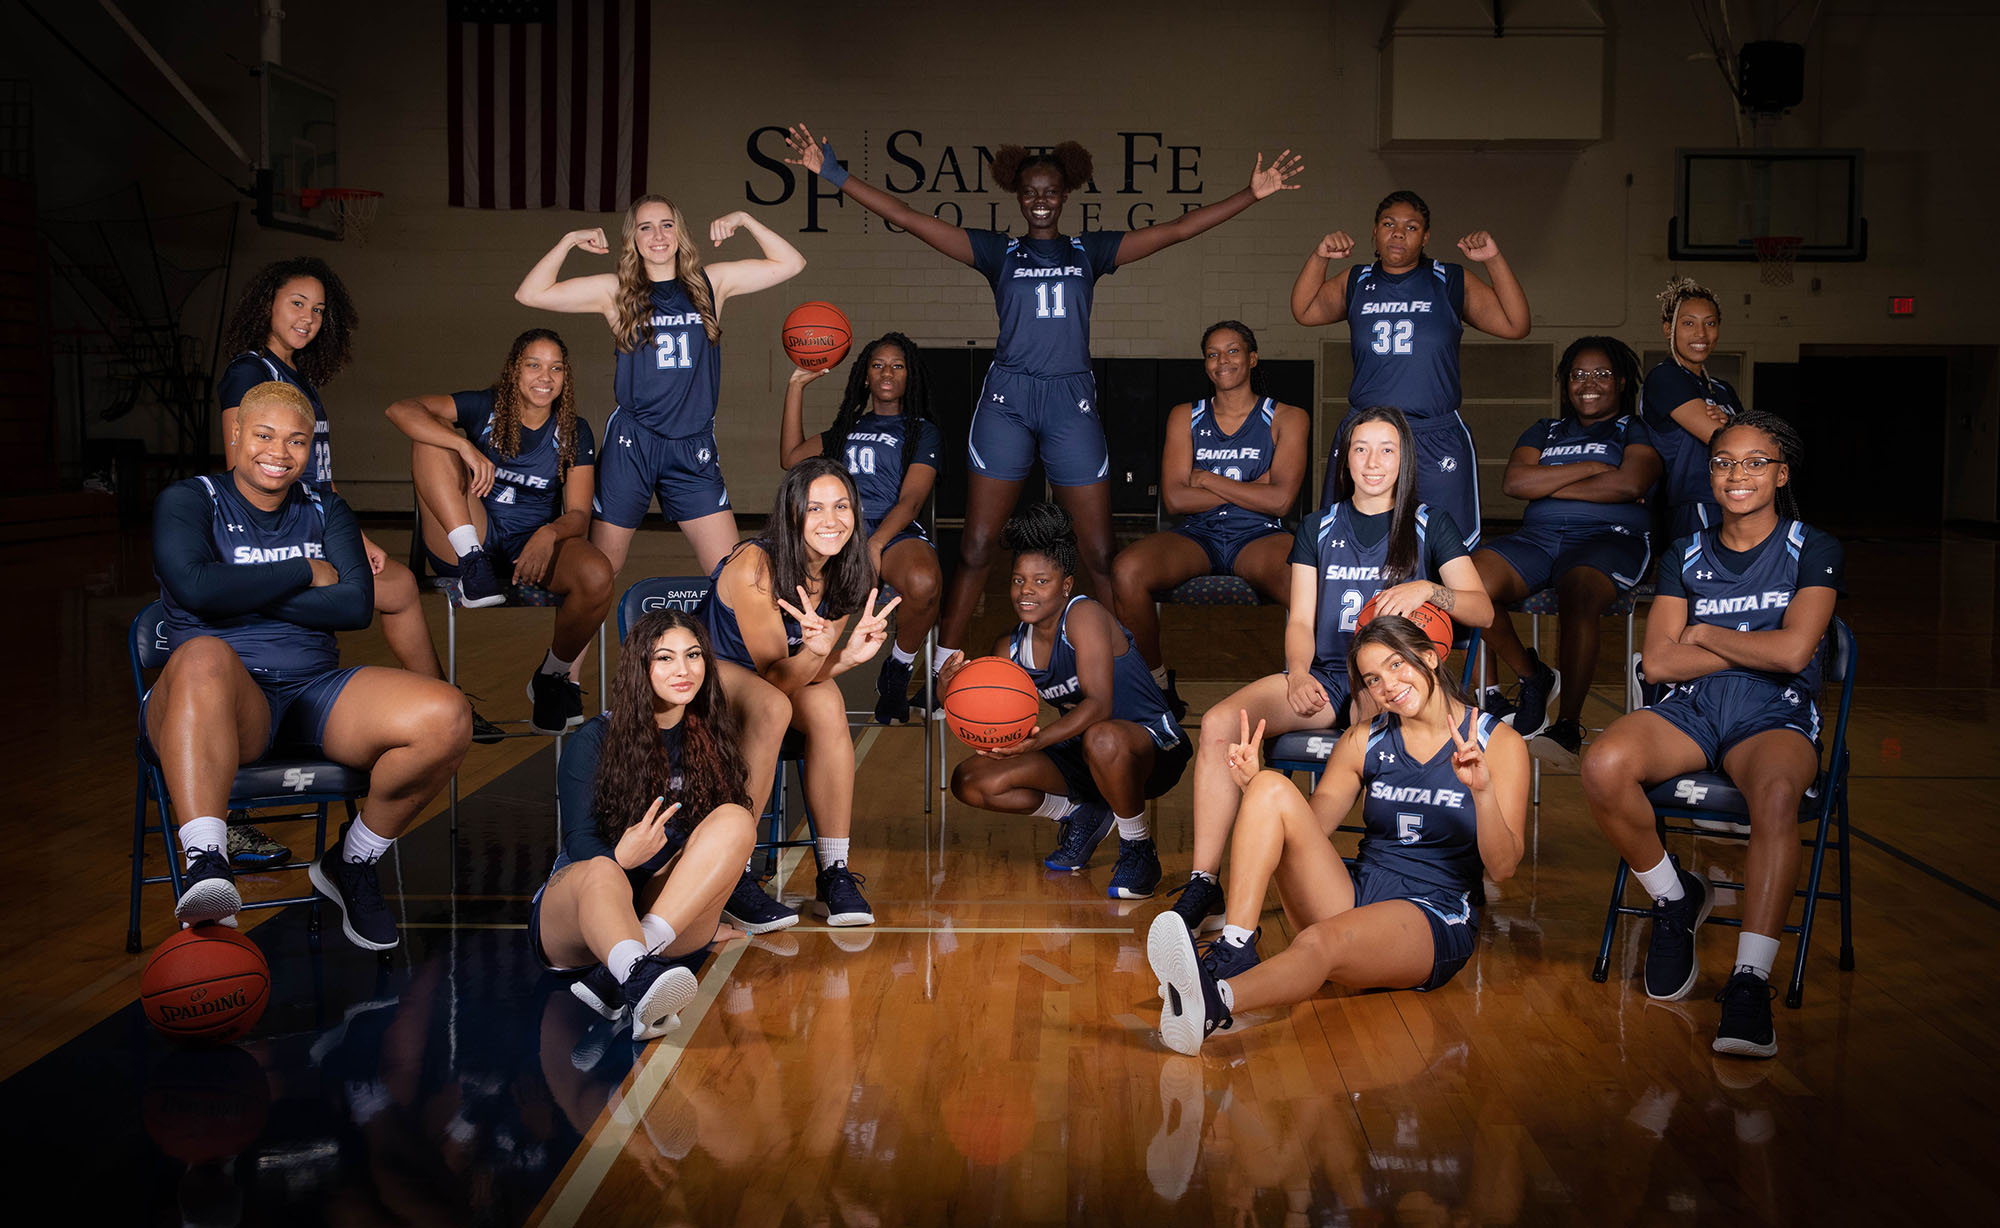 Santa Fe Saints Women’s Basketball team photograph taken on Oct. 15, 2021 in Gainesville , FL. (Photo by Matt Stamey/Santa Fe College) ***Subjects have Signed Photo Releases***